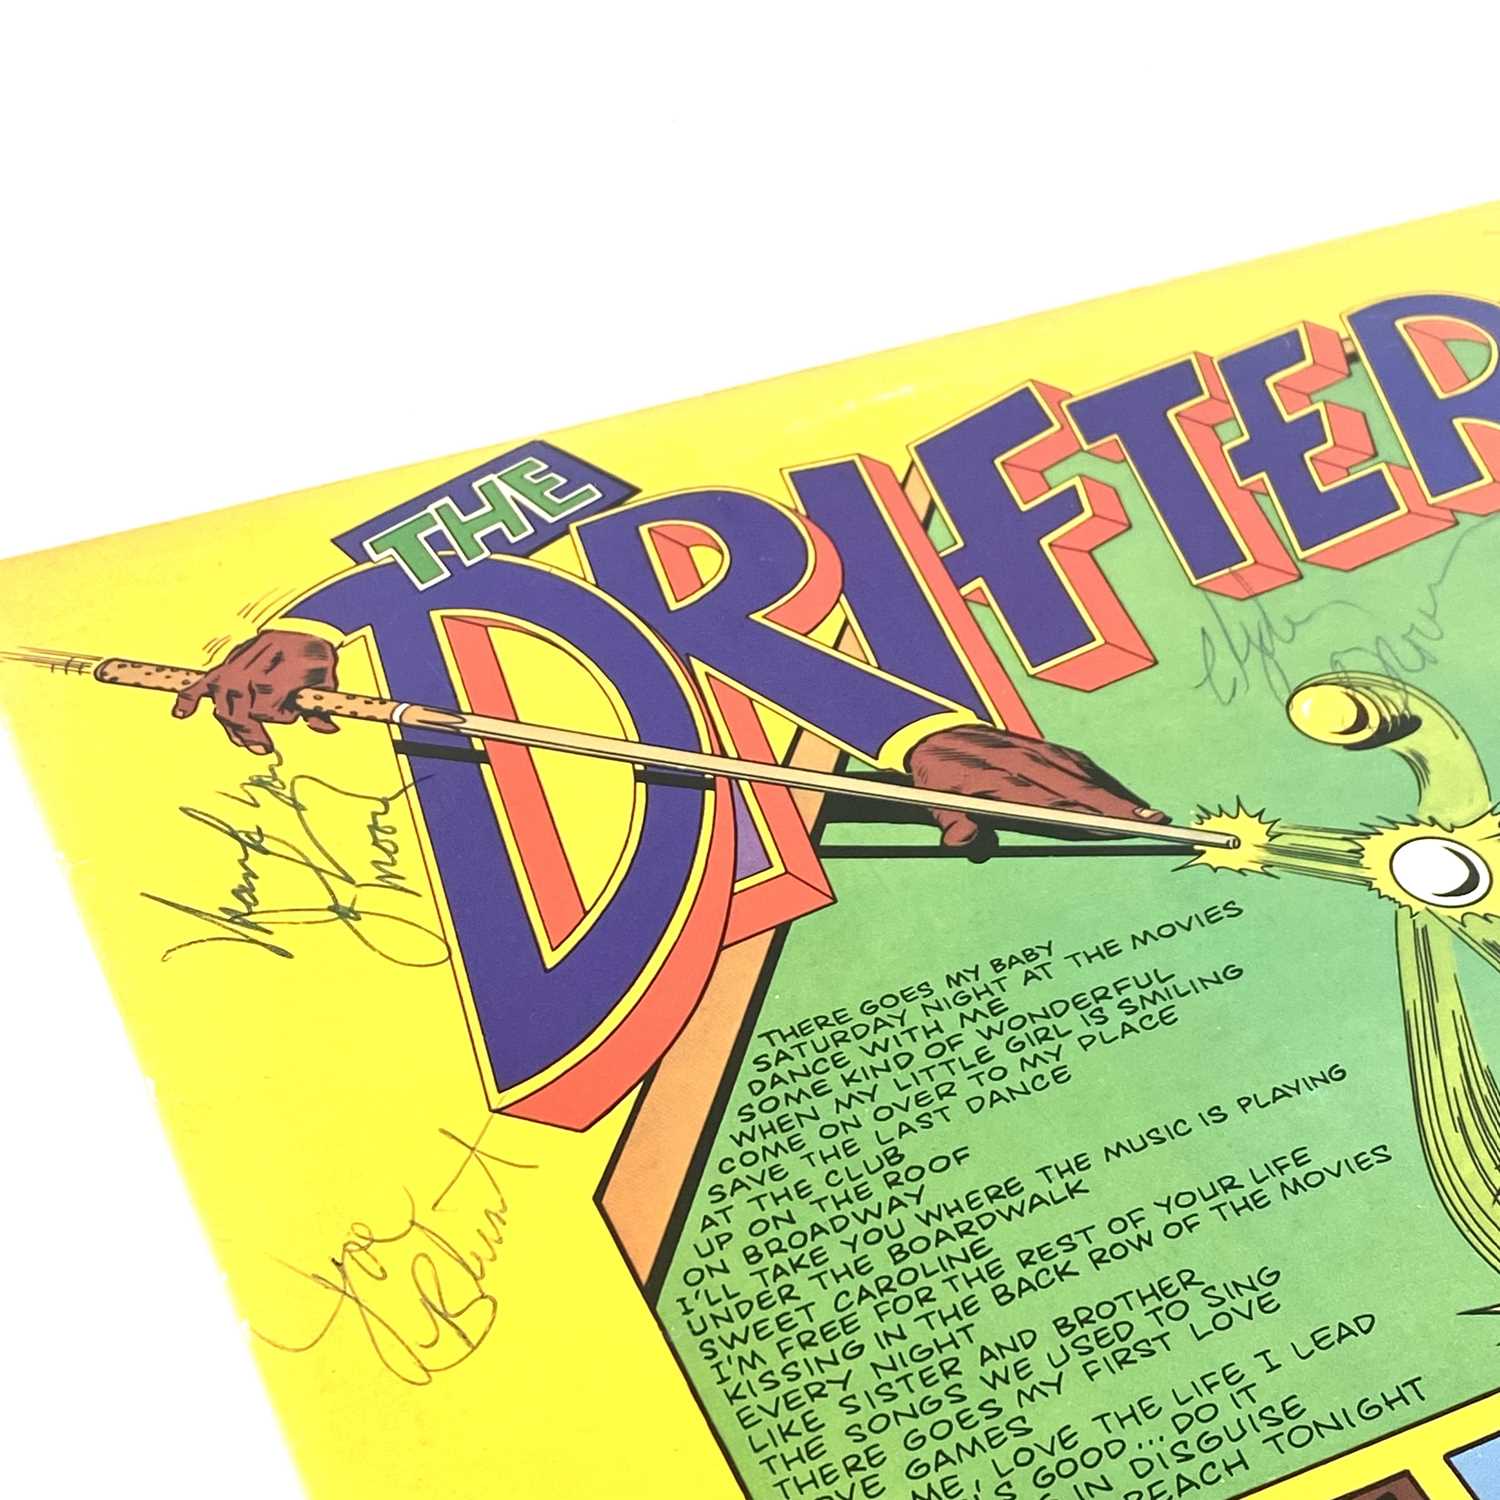 Signed; The Drifters - Image 9 of 11